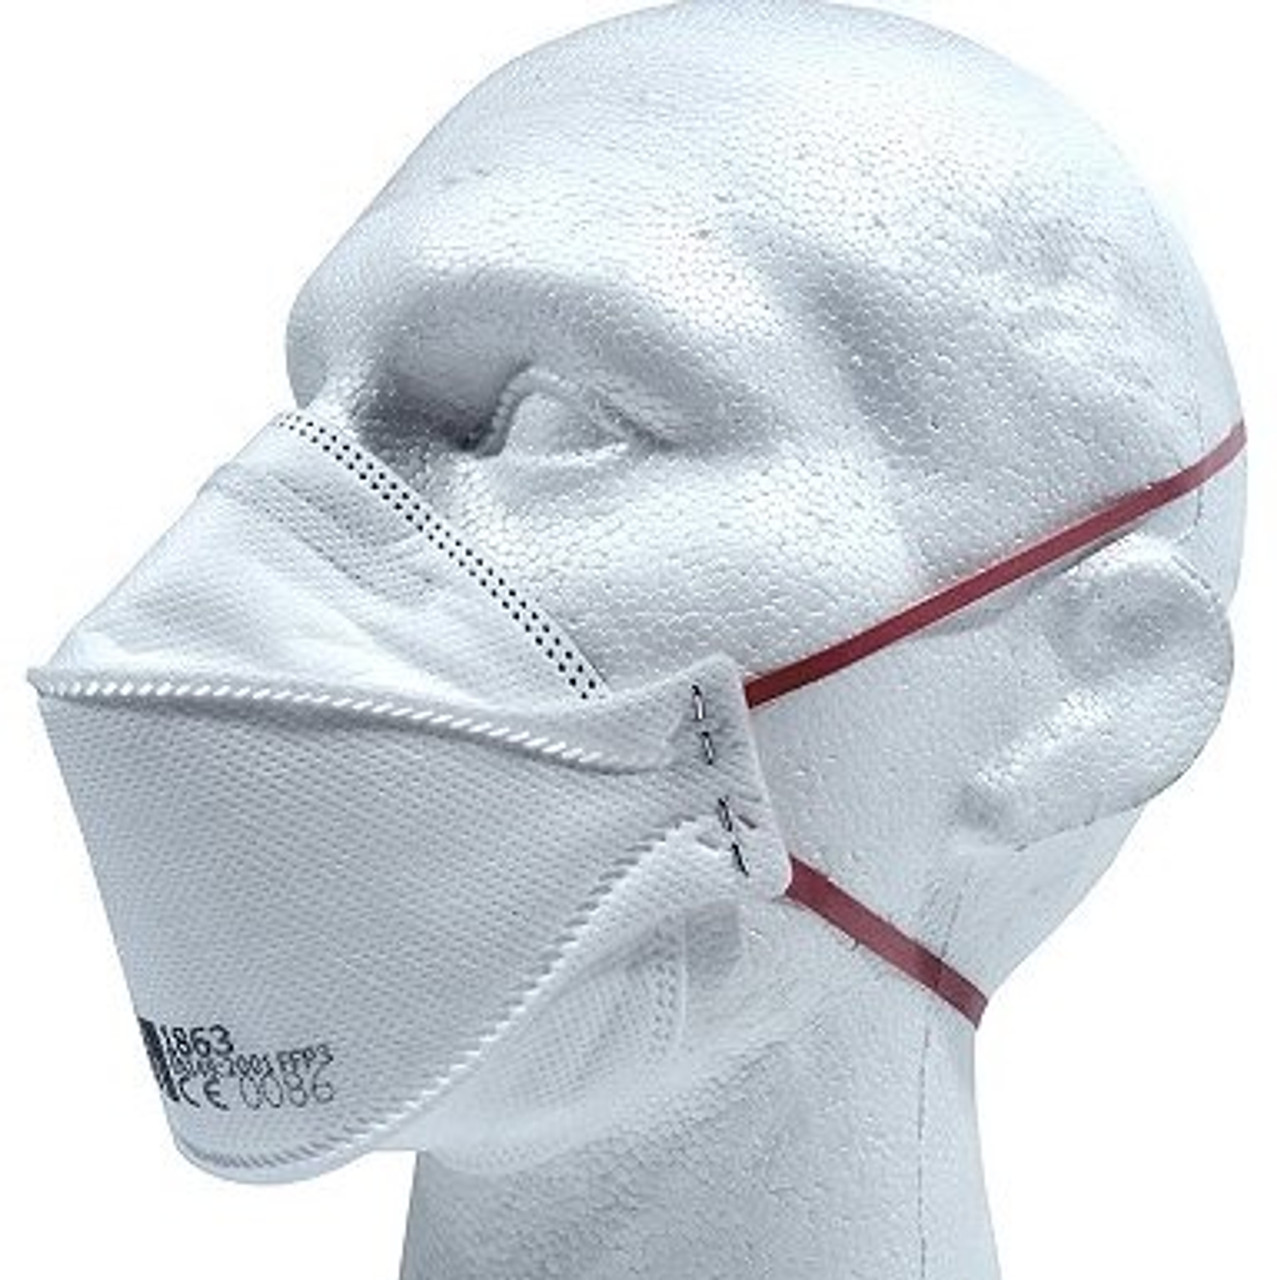 3m-1863-ffp3-mask-type-iir-respirator-the-face-mask-store